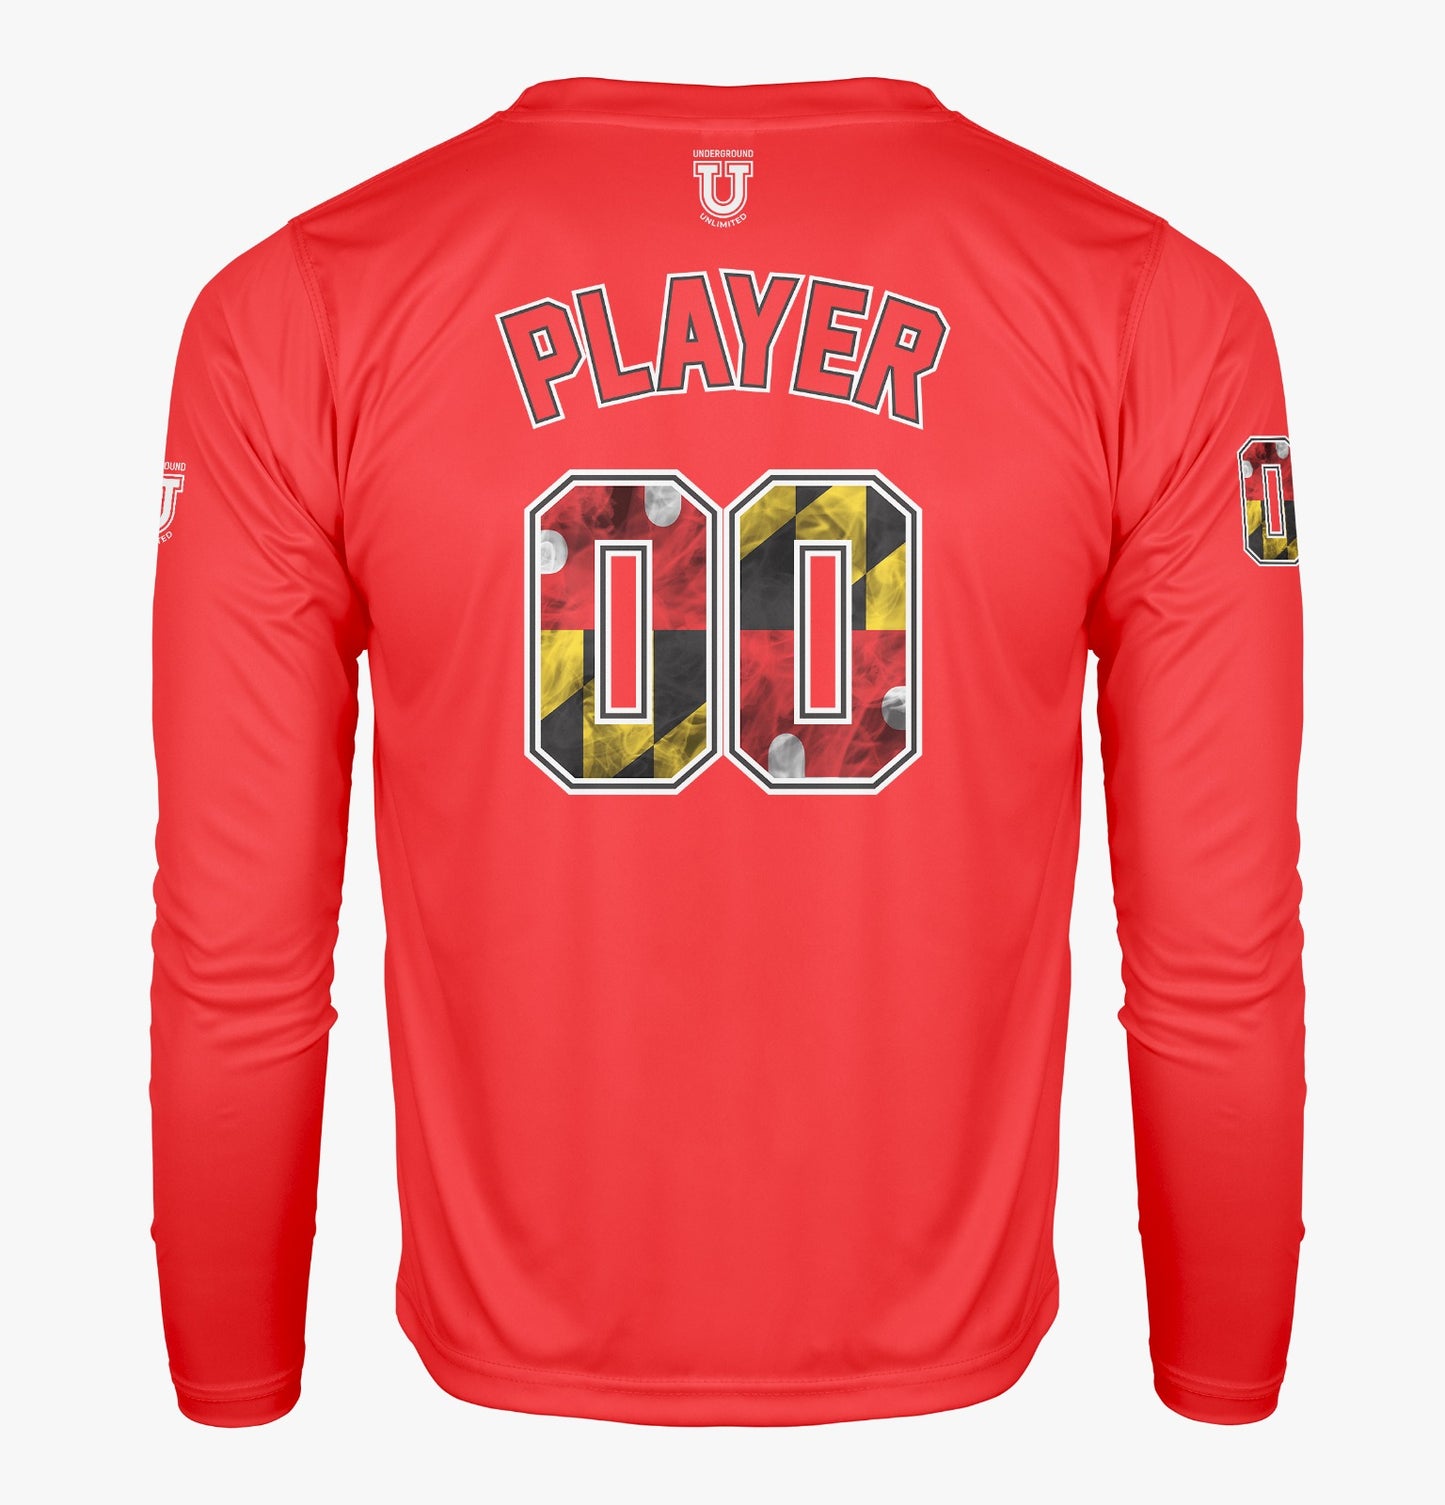 Maryland Clash Pro Performance Sun Long Sleeve ~ Solid Red